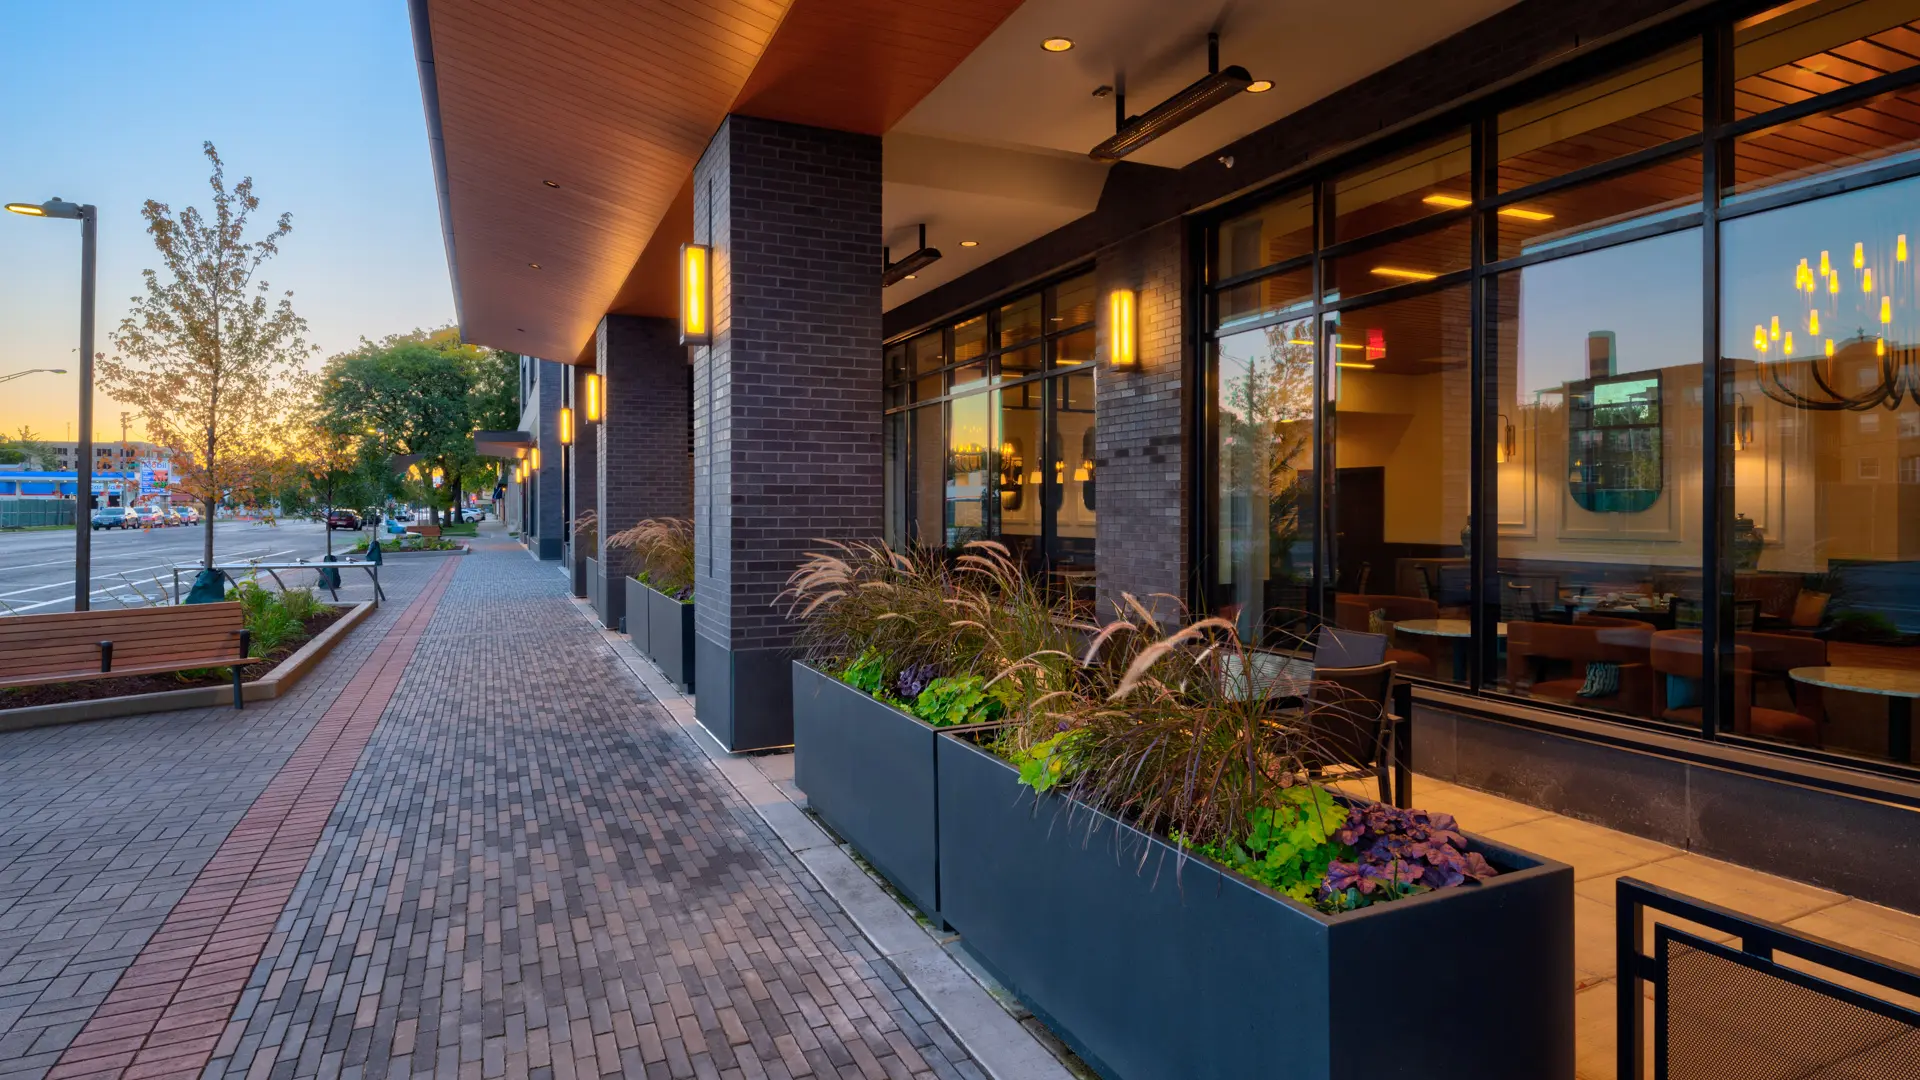 Sidewalk view of the dining room at American House Oak Park, a luxury senior living community in Oak Park, Illinois